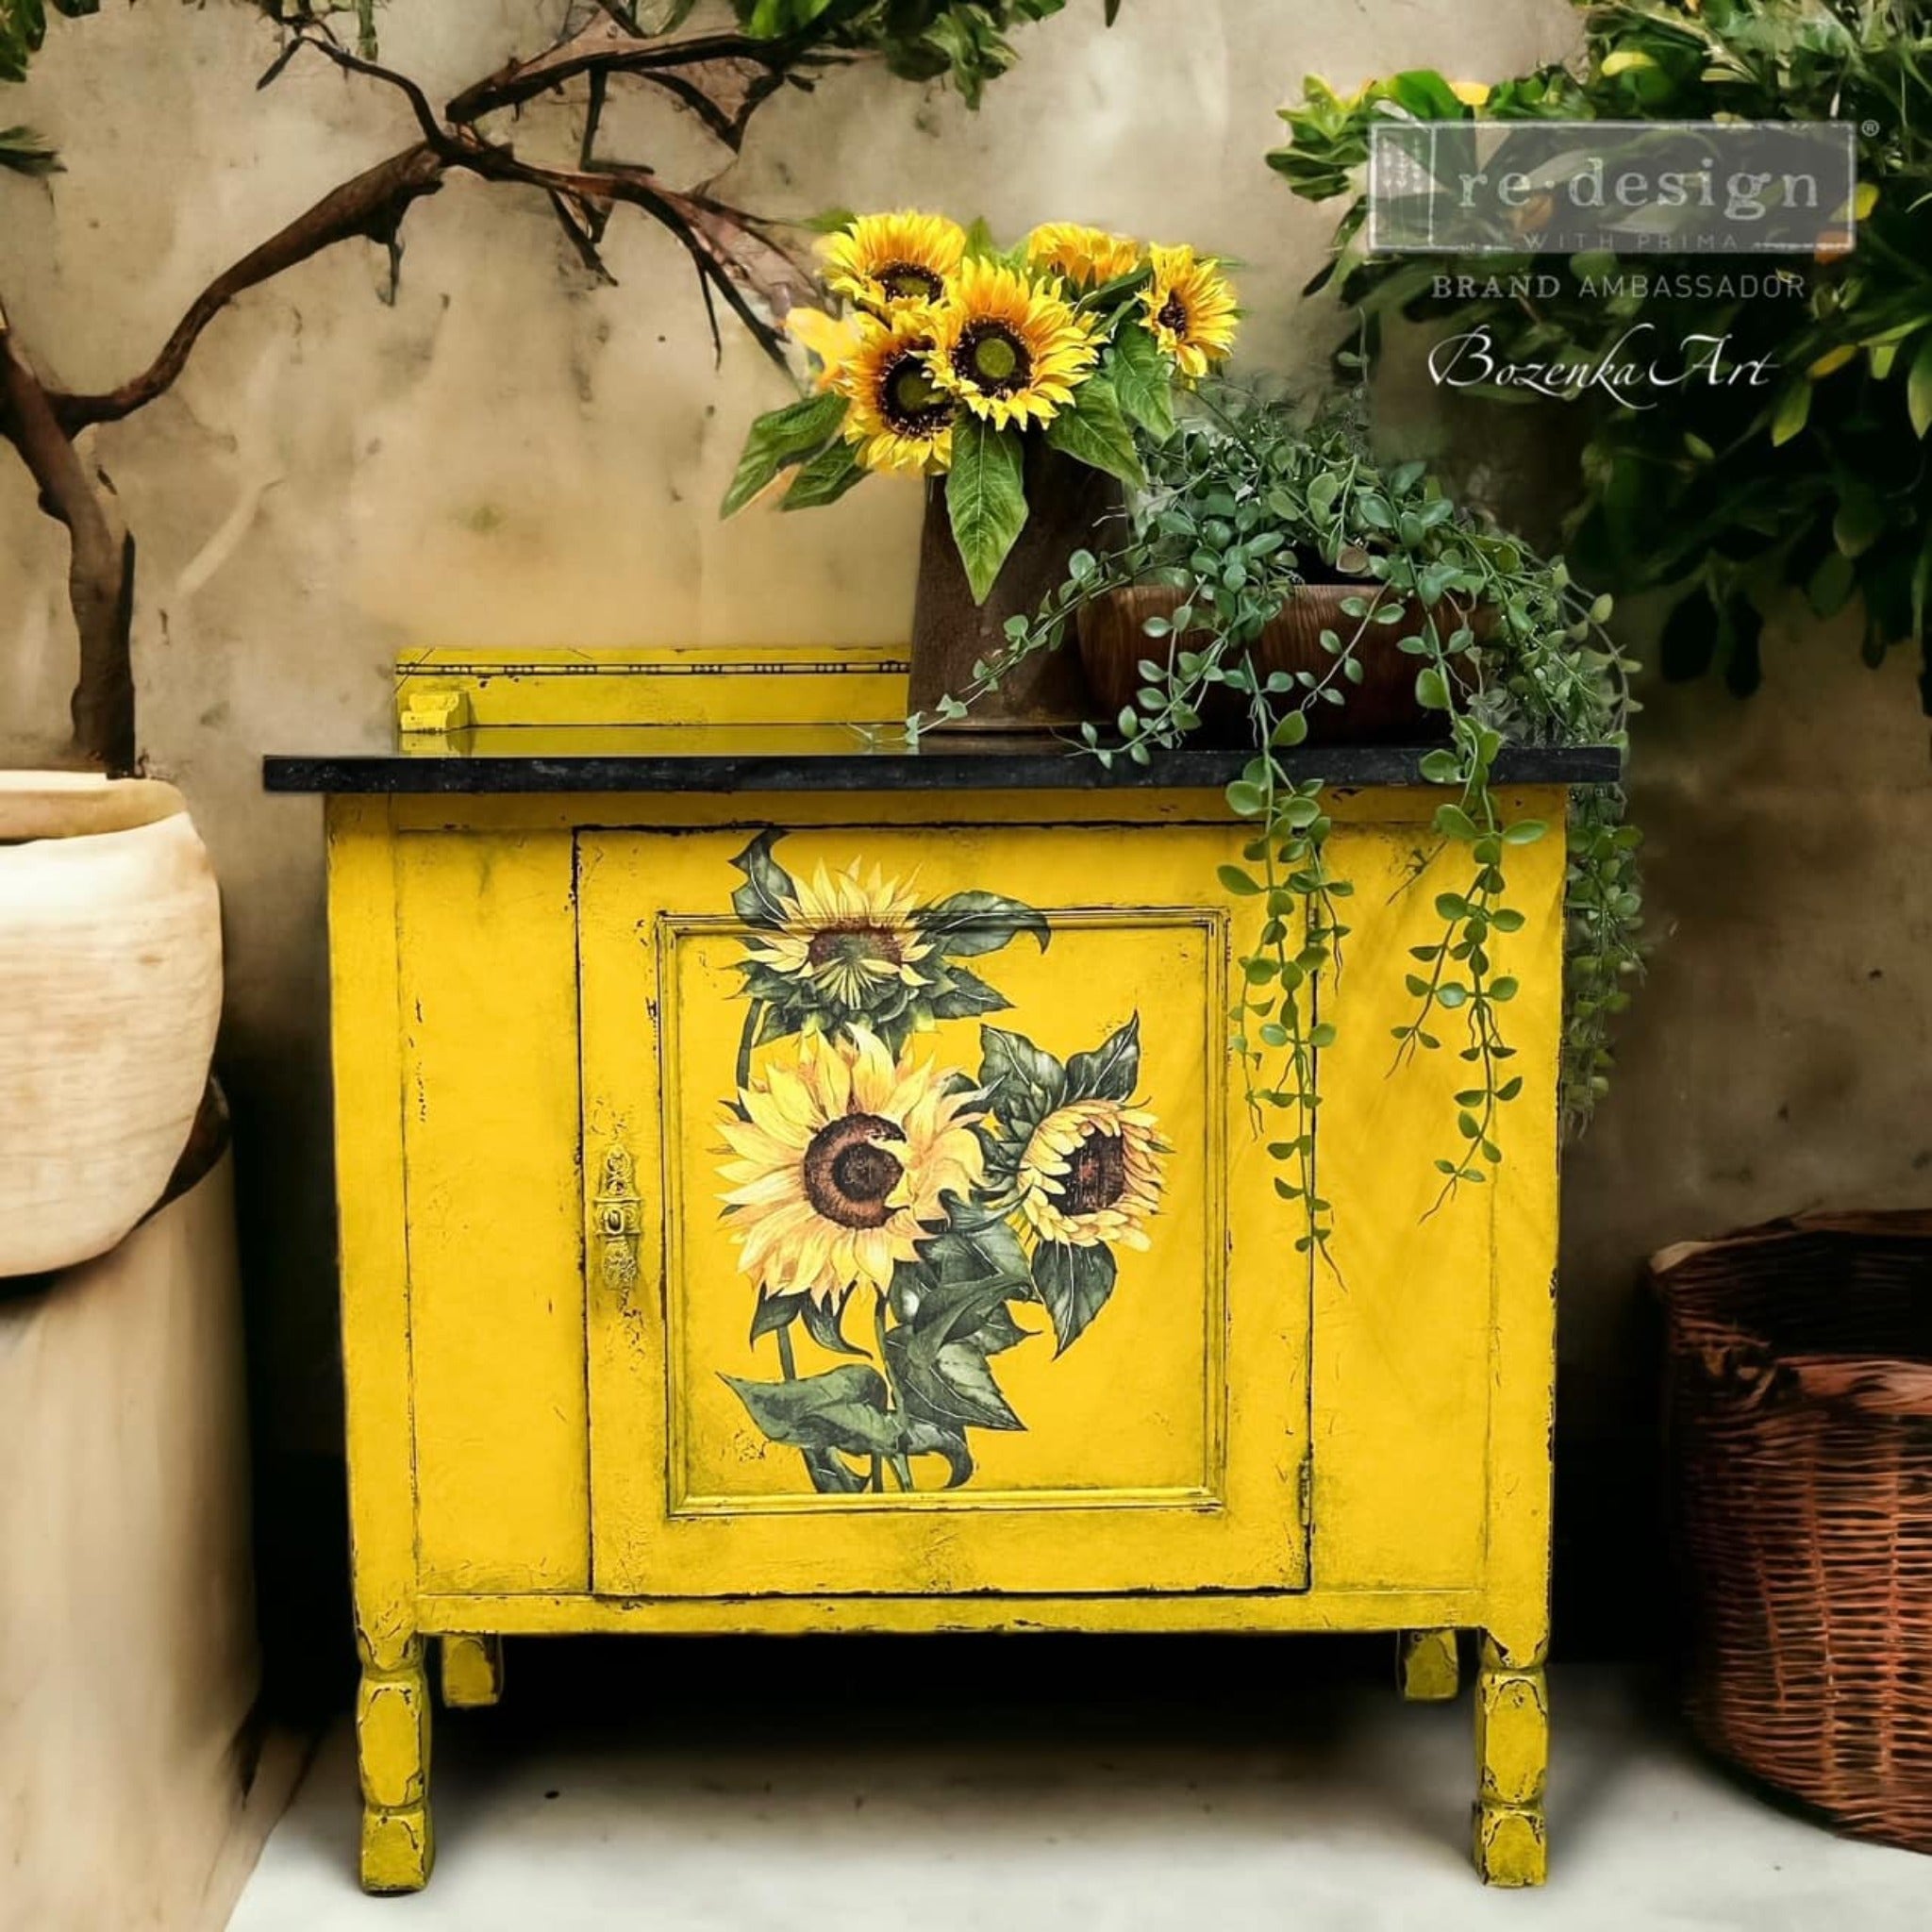 A vintage storage table refurbishd by Bozenka Art is painted bright sunflower yellow and features ReDesign with Prima's Sunflower transfer on its door.